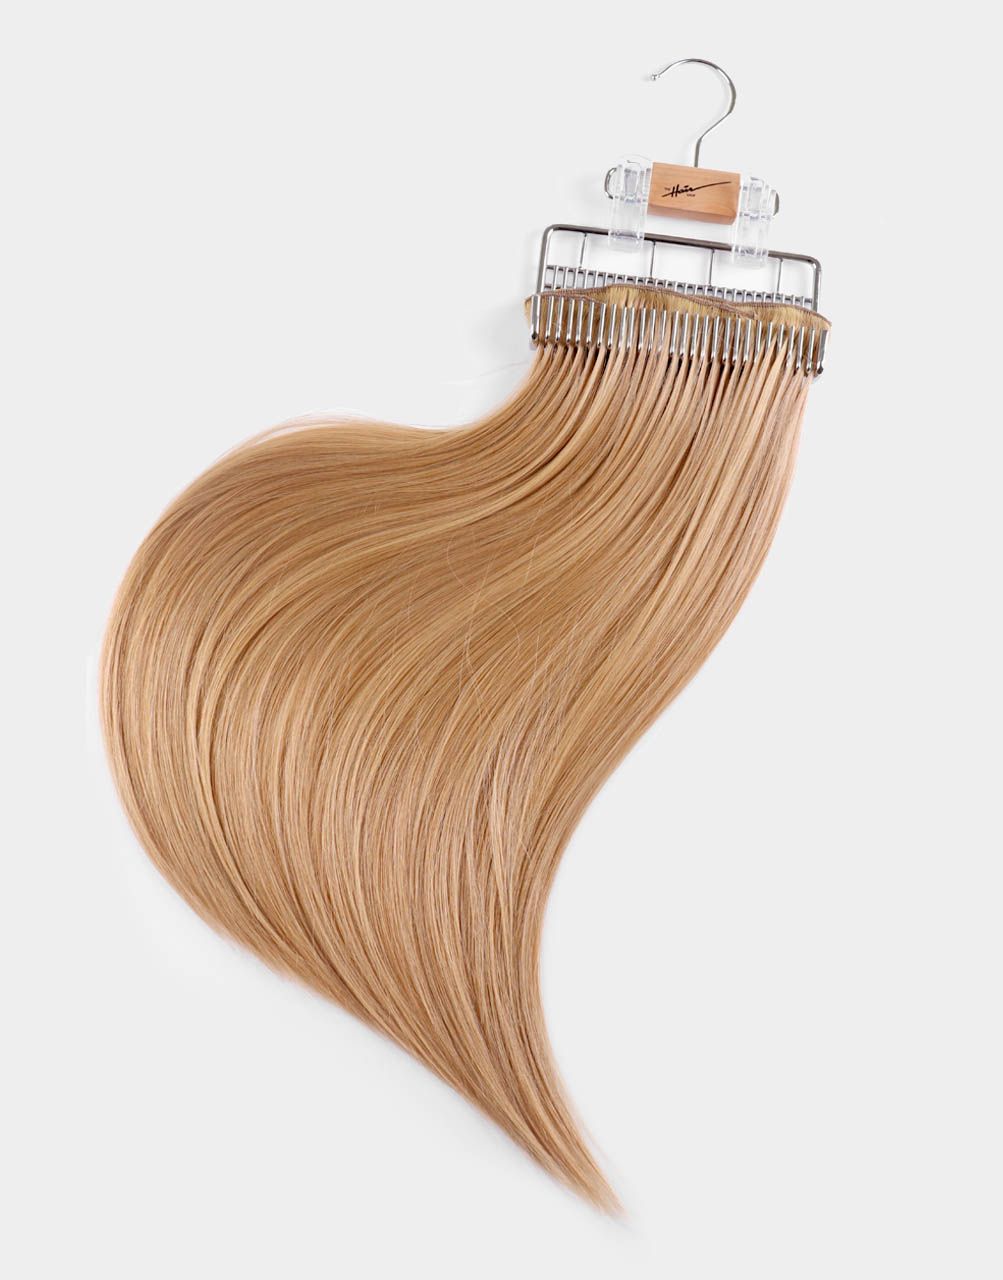 5 clip-in hair extensions to transform your look in minutes